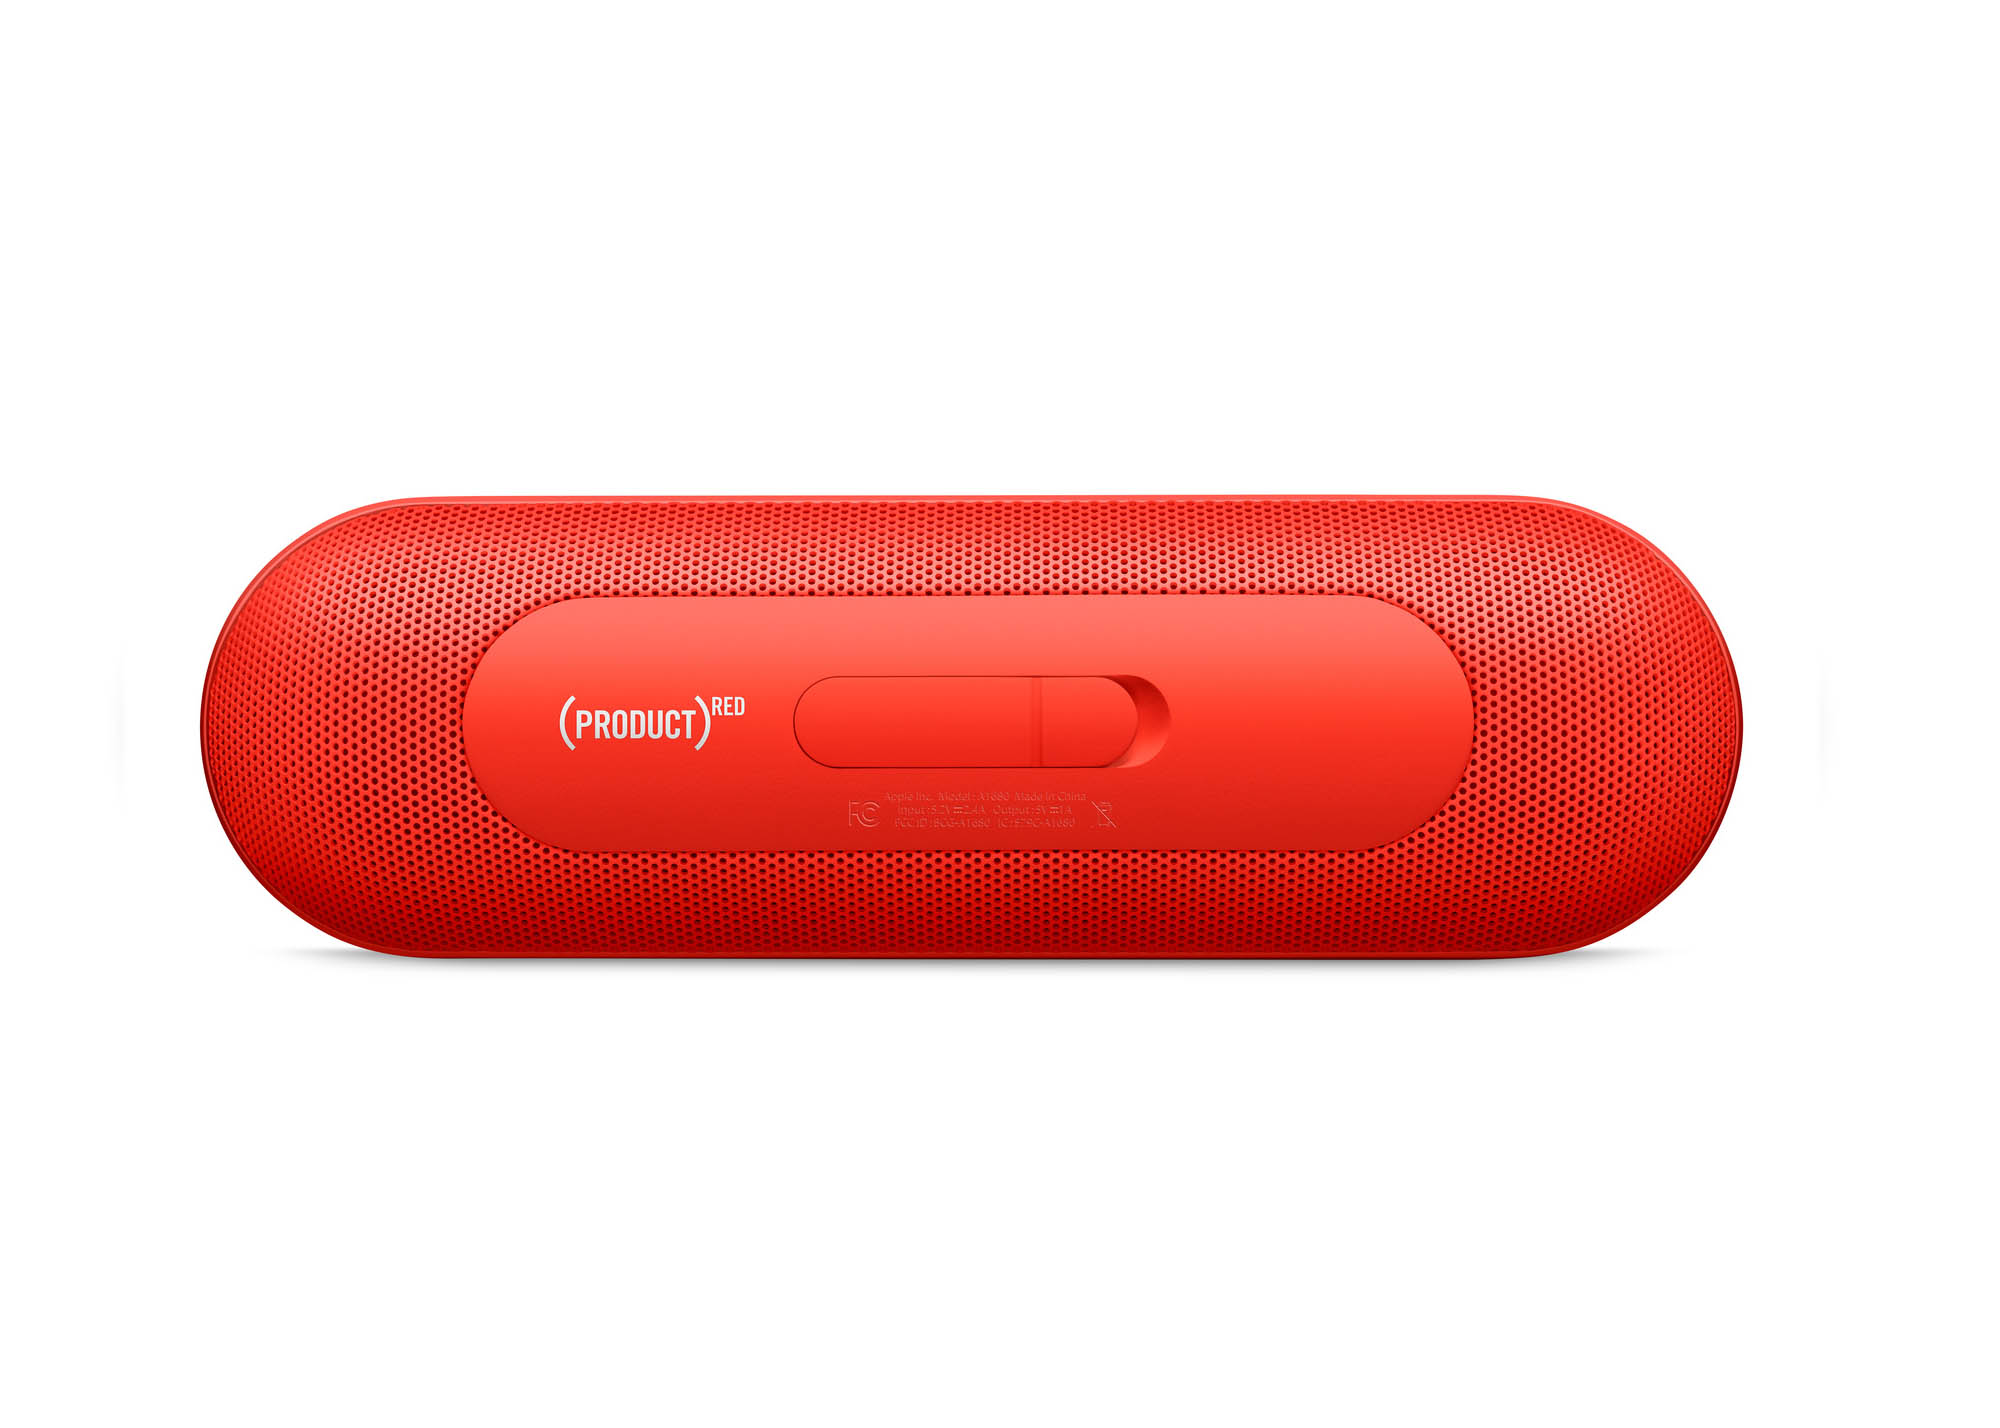 Beats Pill+ Portable Speaker ML4Q2LL/A PRODUCT Red - US